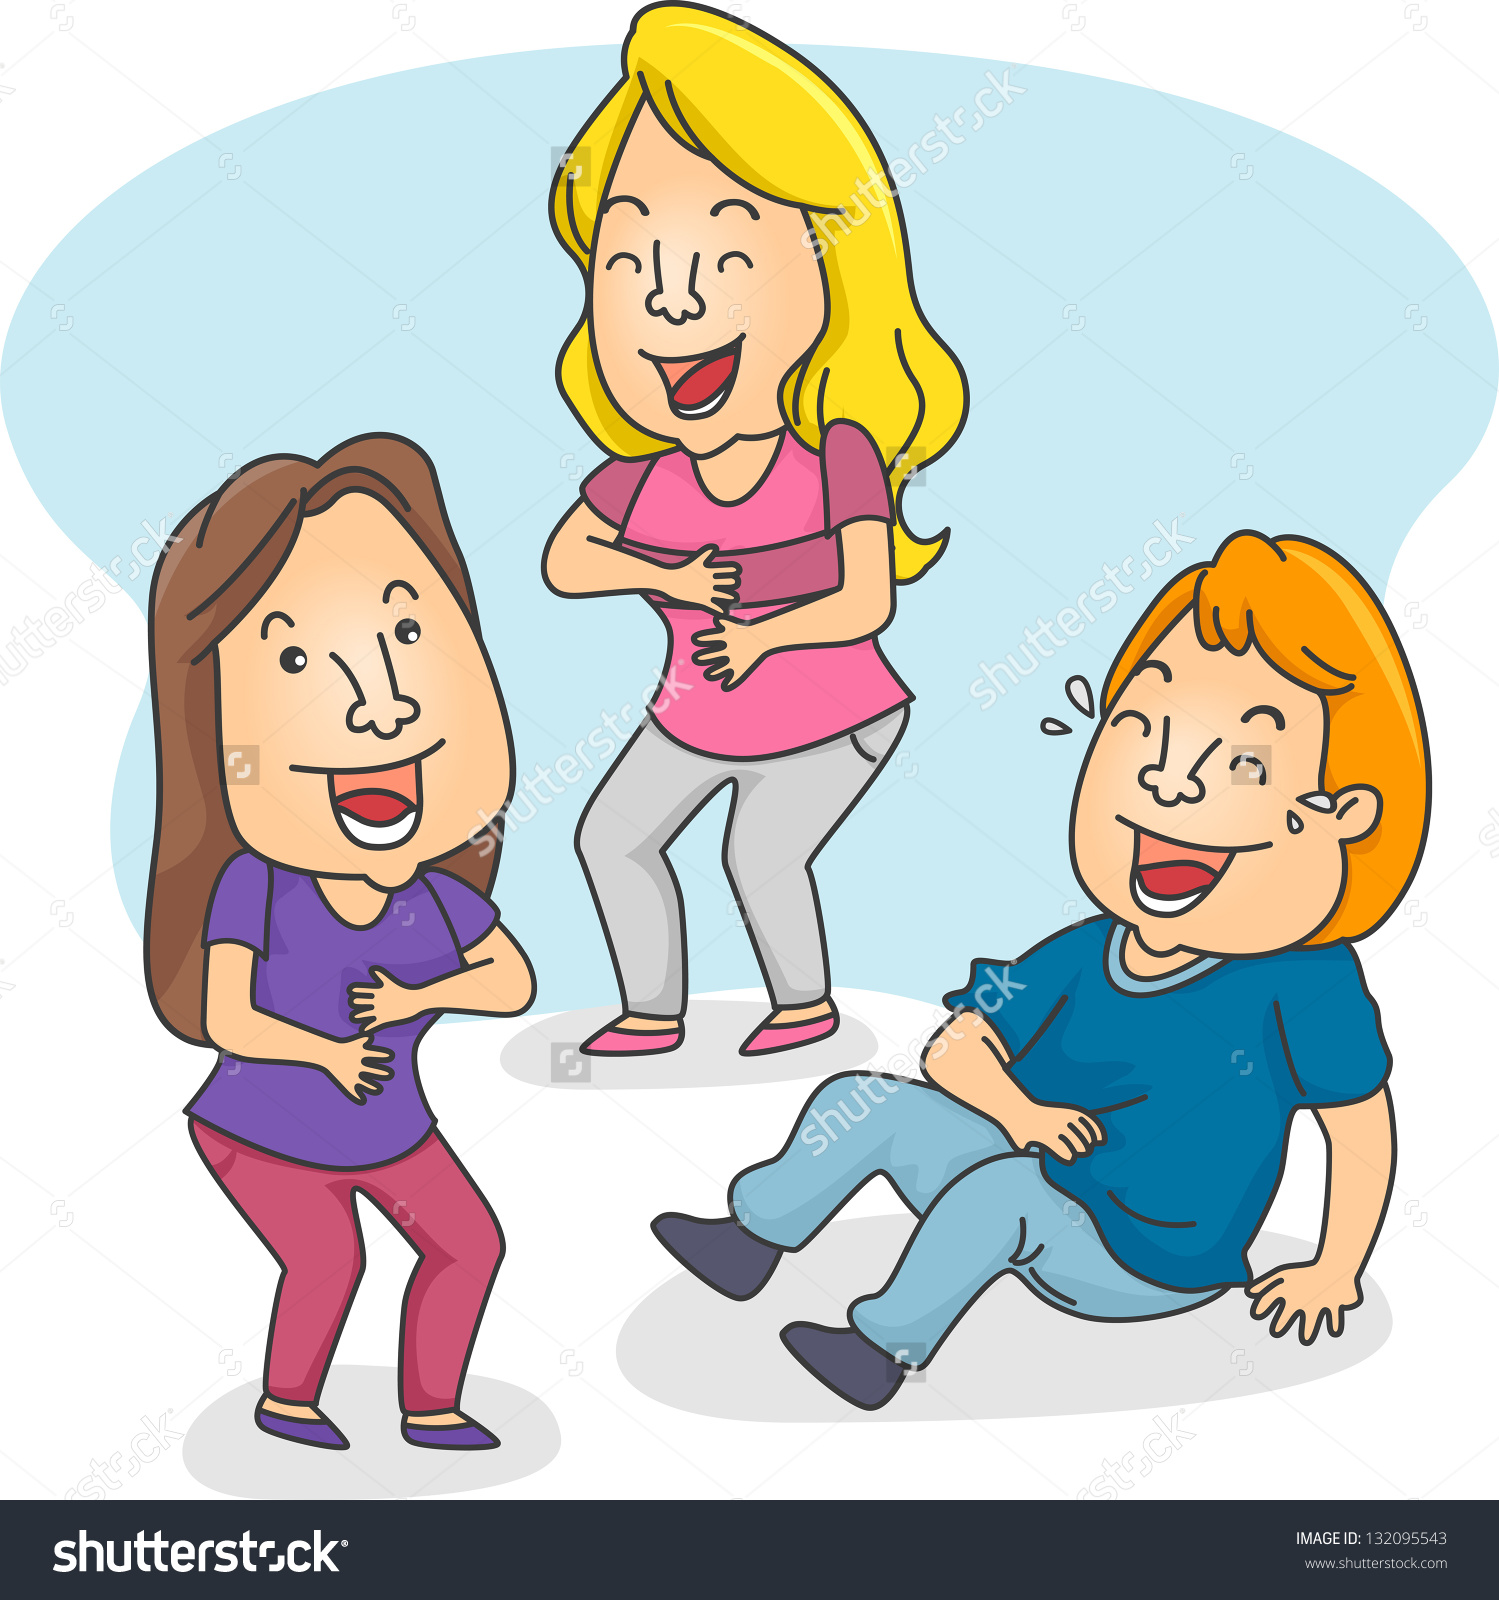 Laughter Clip Art Free .